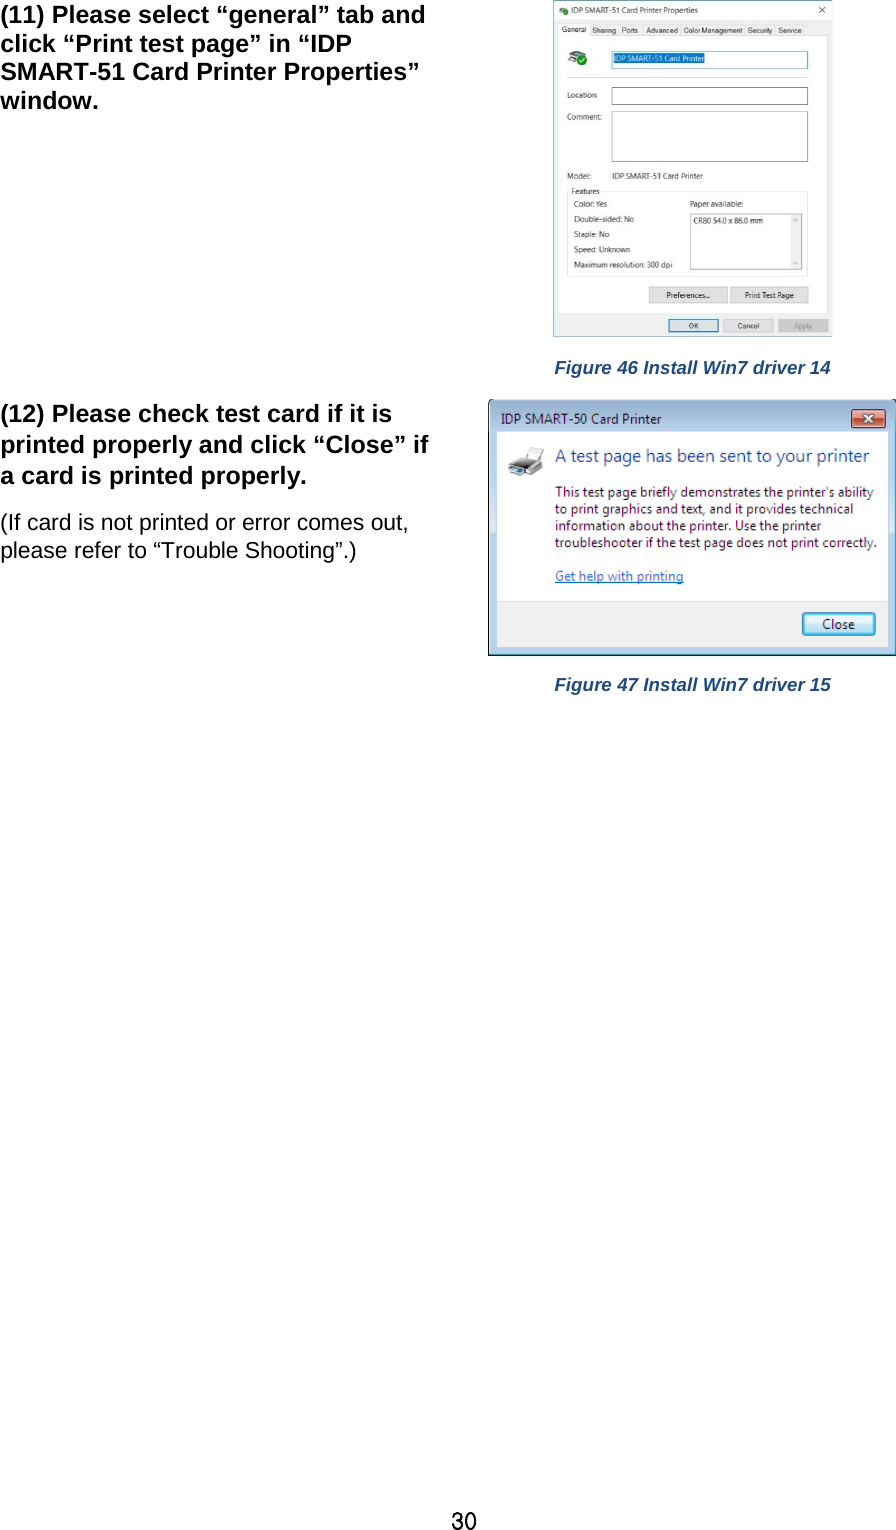 30 (11) Please select “general” tab and click “Print test page” in “IDP SMART-51 Card Printer Properties” window.   Figure 46 Install Win7 driver 14 (12) Please check test card if it is printed properly and click “Close” if a card is printed properly.   (If card is not printed or error comes out, please refer to “Trouble Shooting”.)    Figure 47 Install Win7 driver 15      